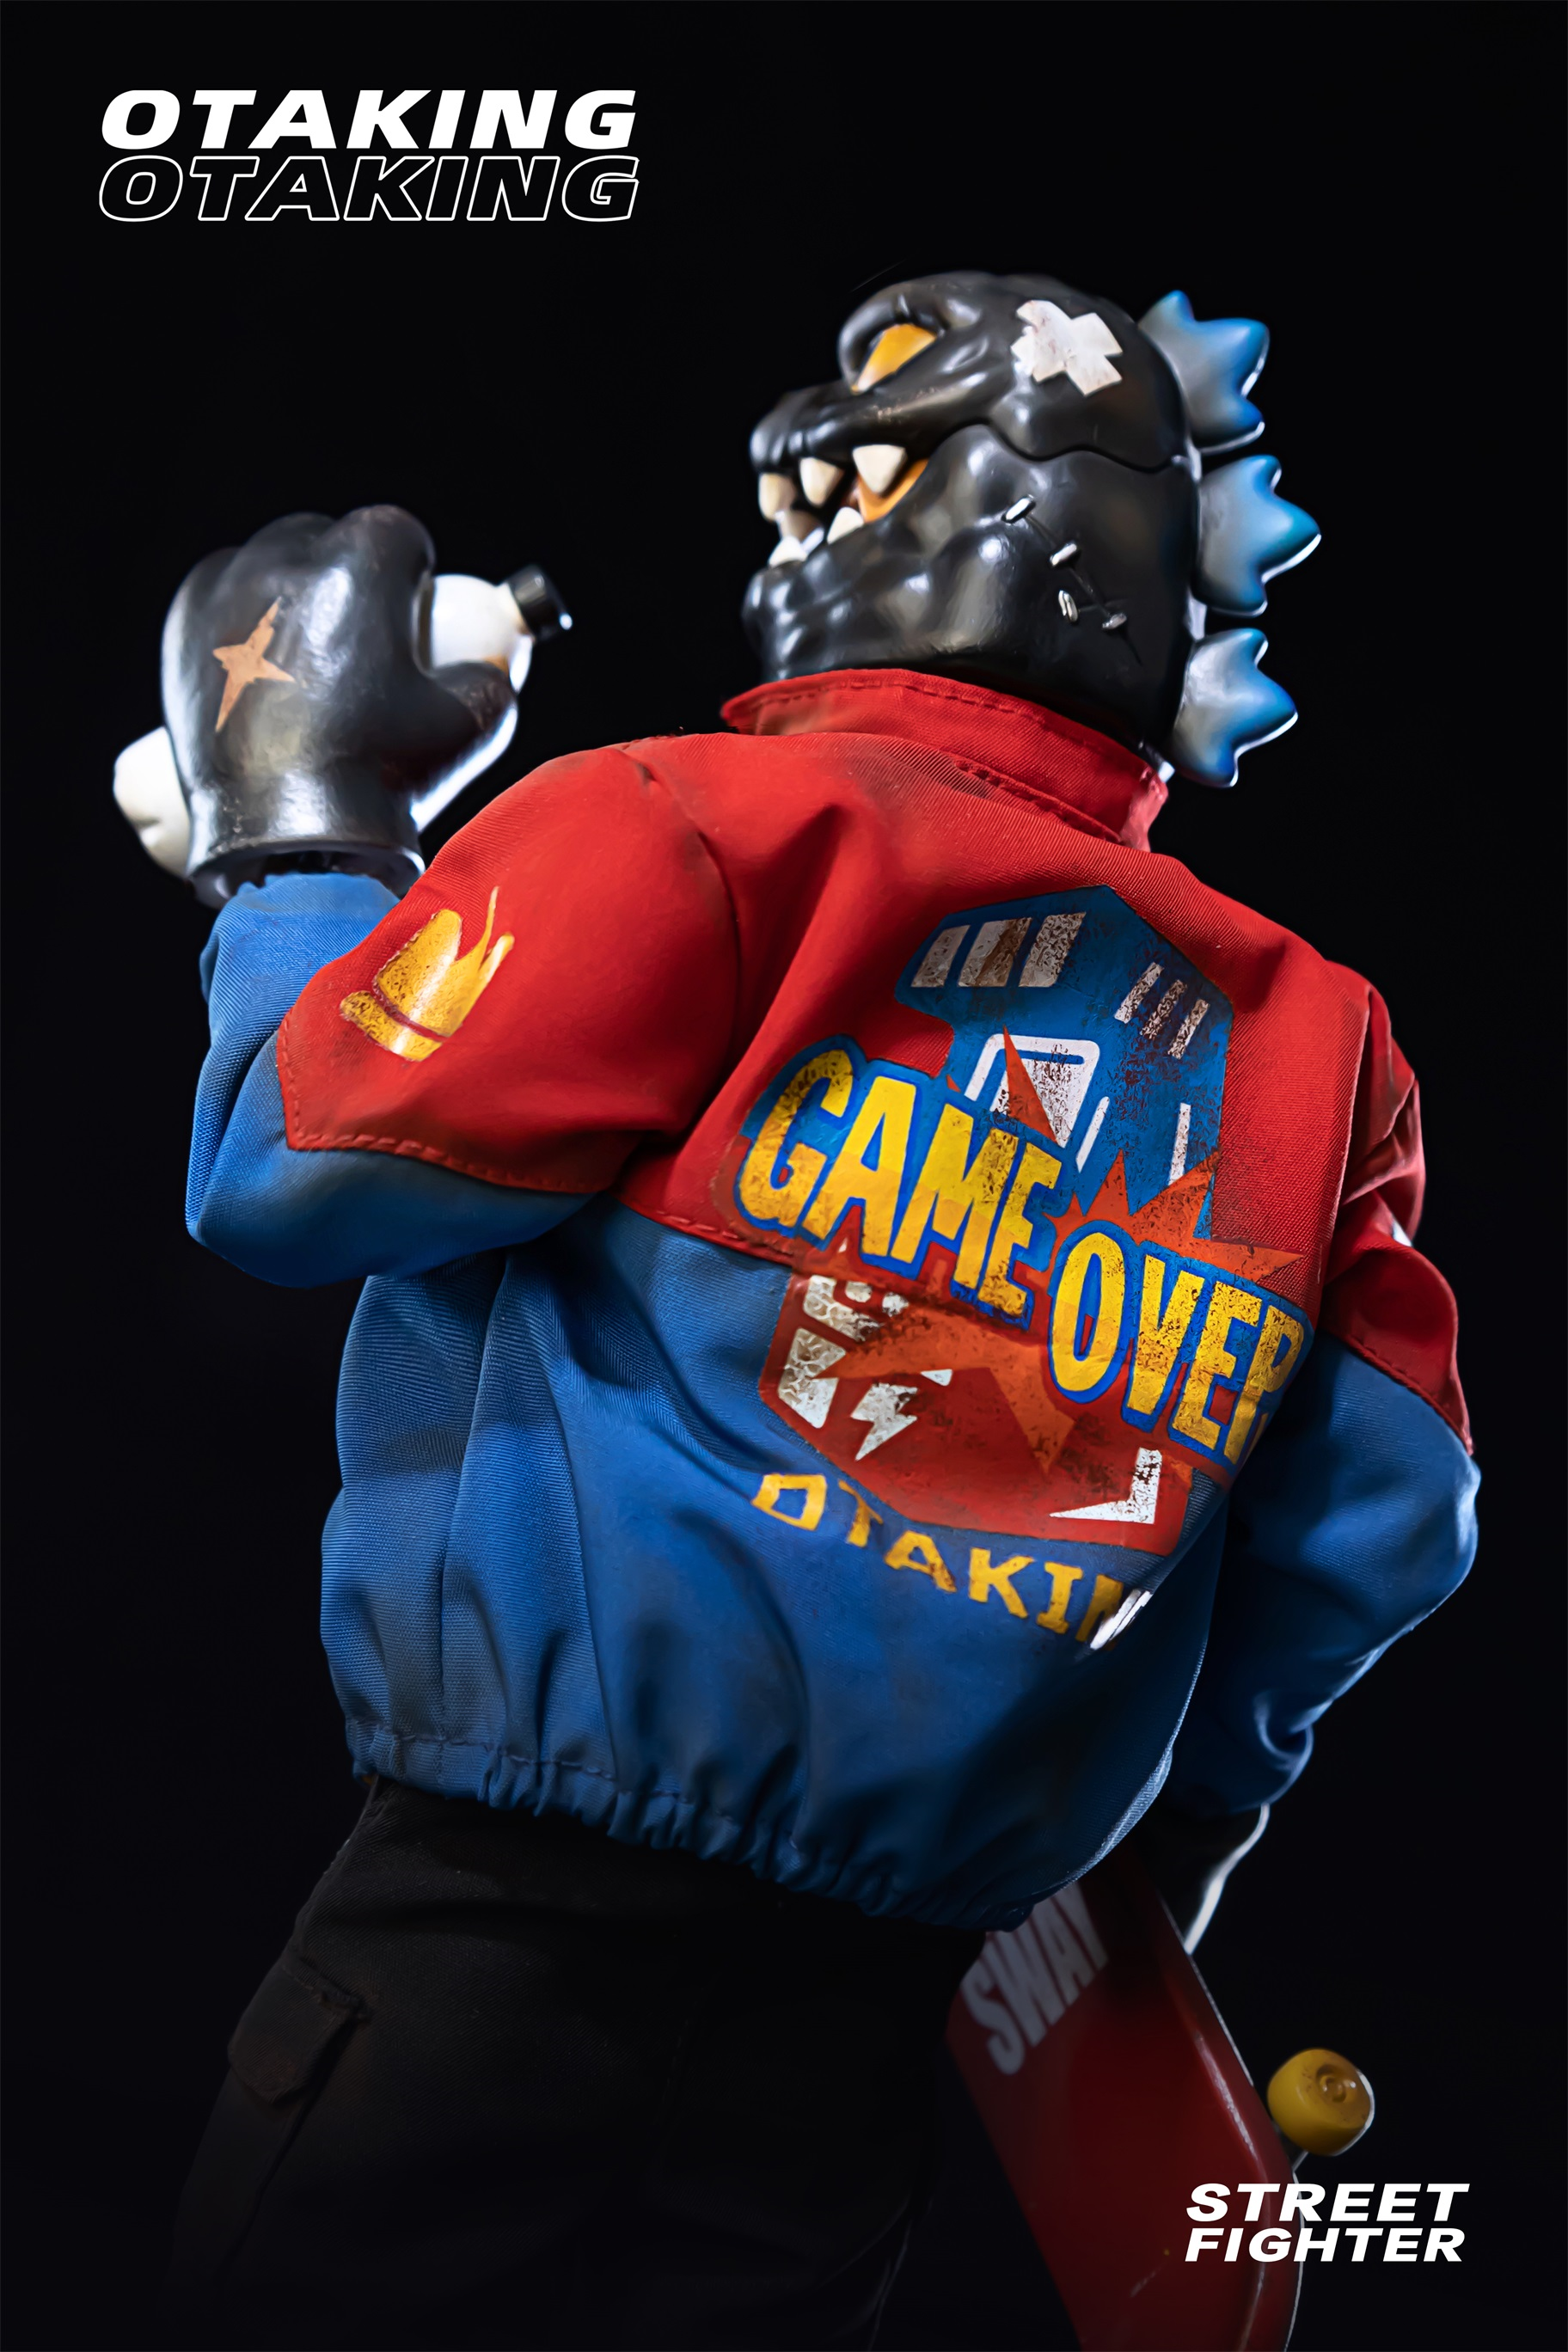 Person in superhero attire with mask, gloves, and logo. Close-up of toy and skateboard. Limited edition OTAKING - Street fighter product.